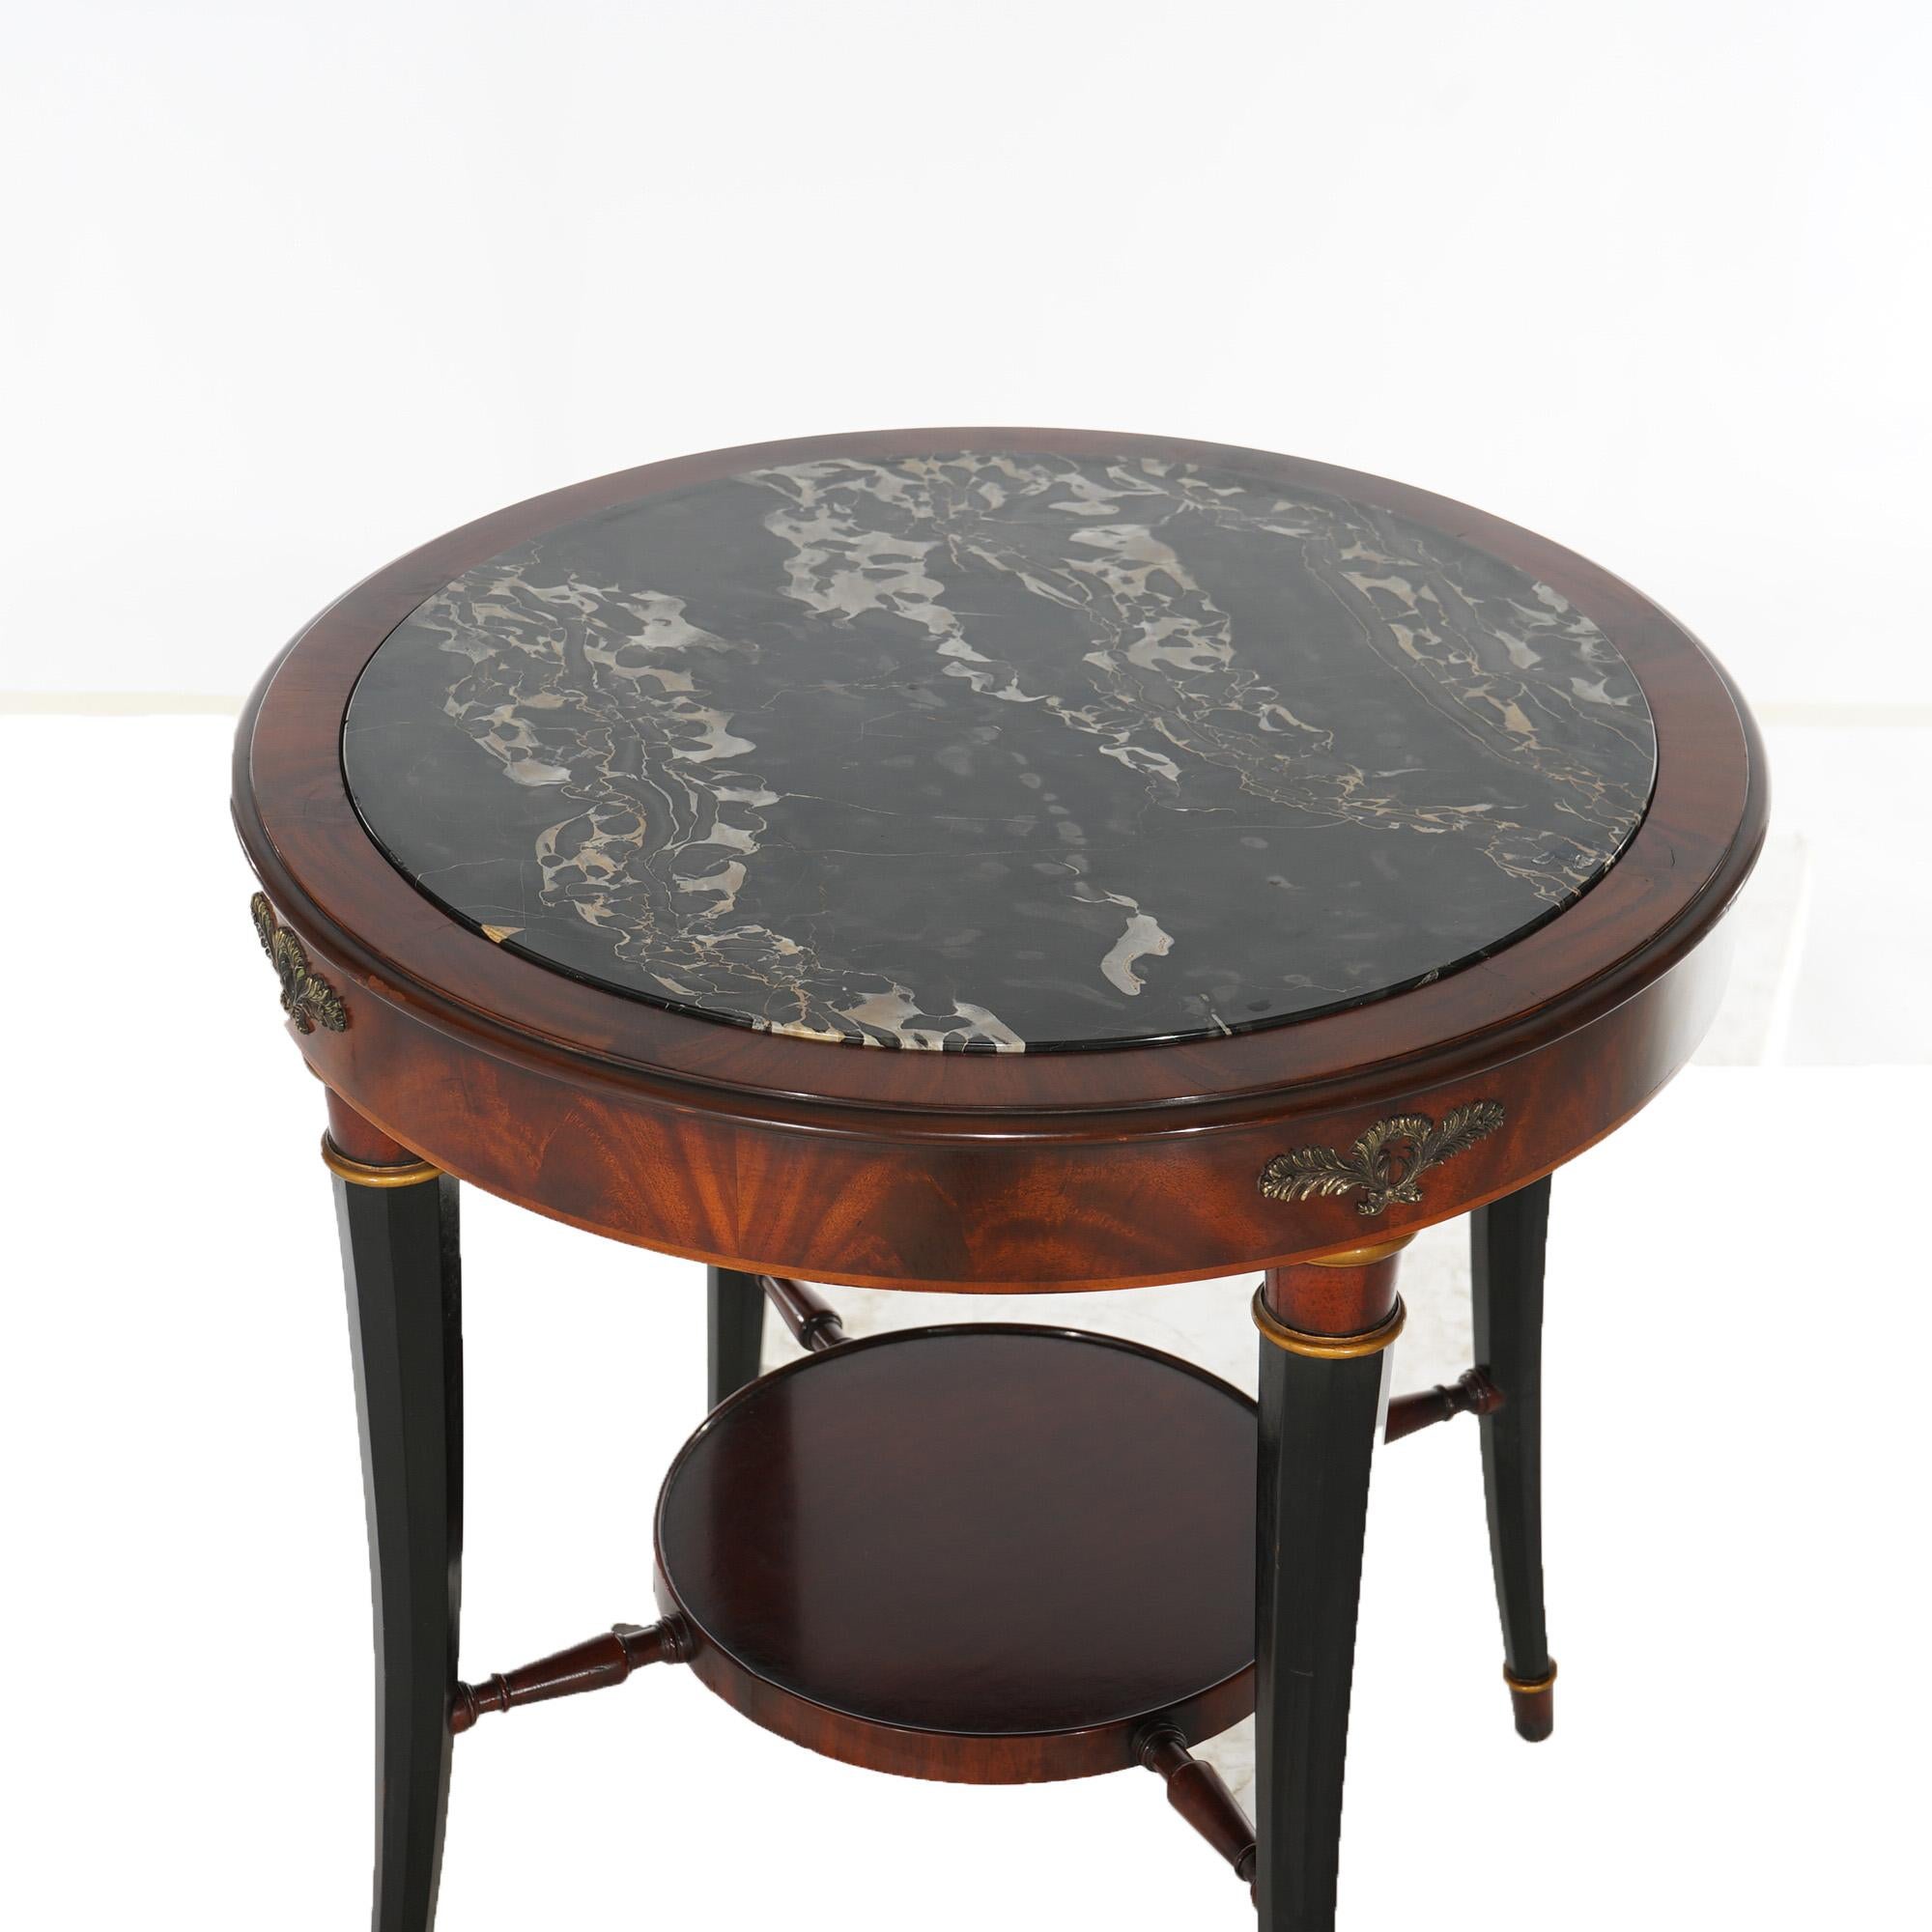 An antique pair of English Regency side tables offer flame mahogany construction with inset marble top, foliate cast bronze mounts, lower circular display and raised on ebonized faceted slightly splayed legs, c1920

Measures - 28